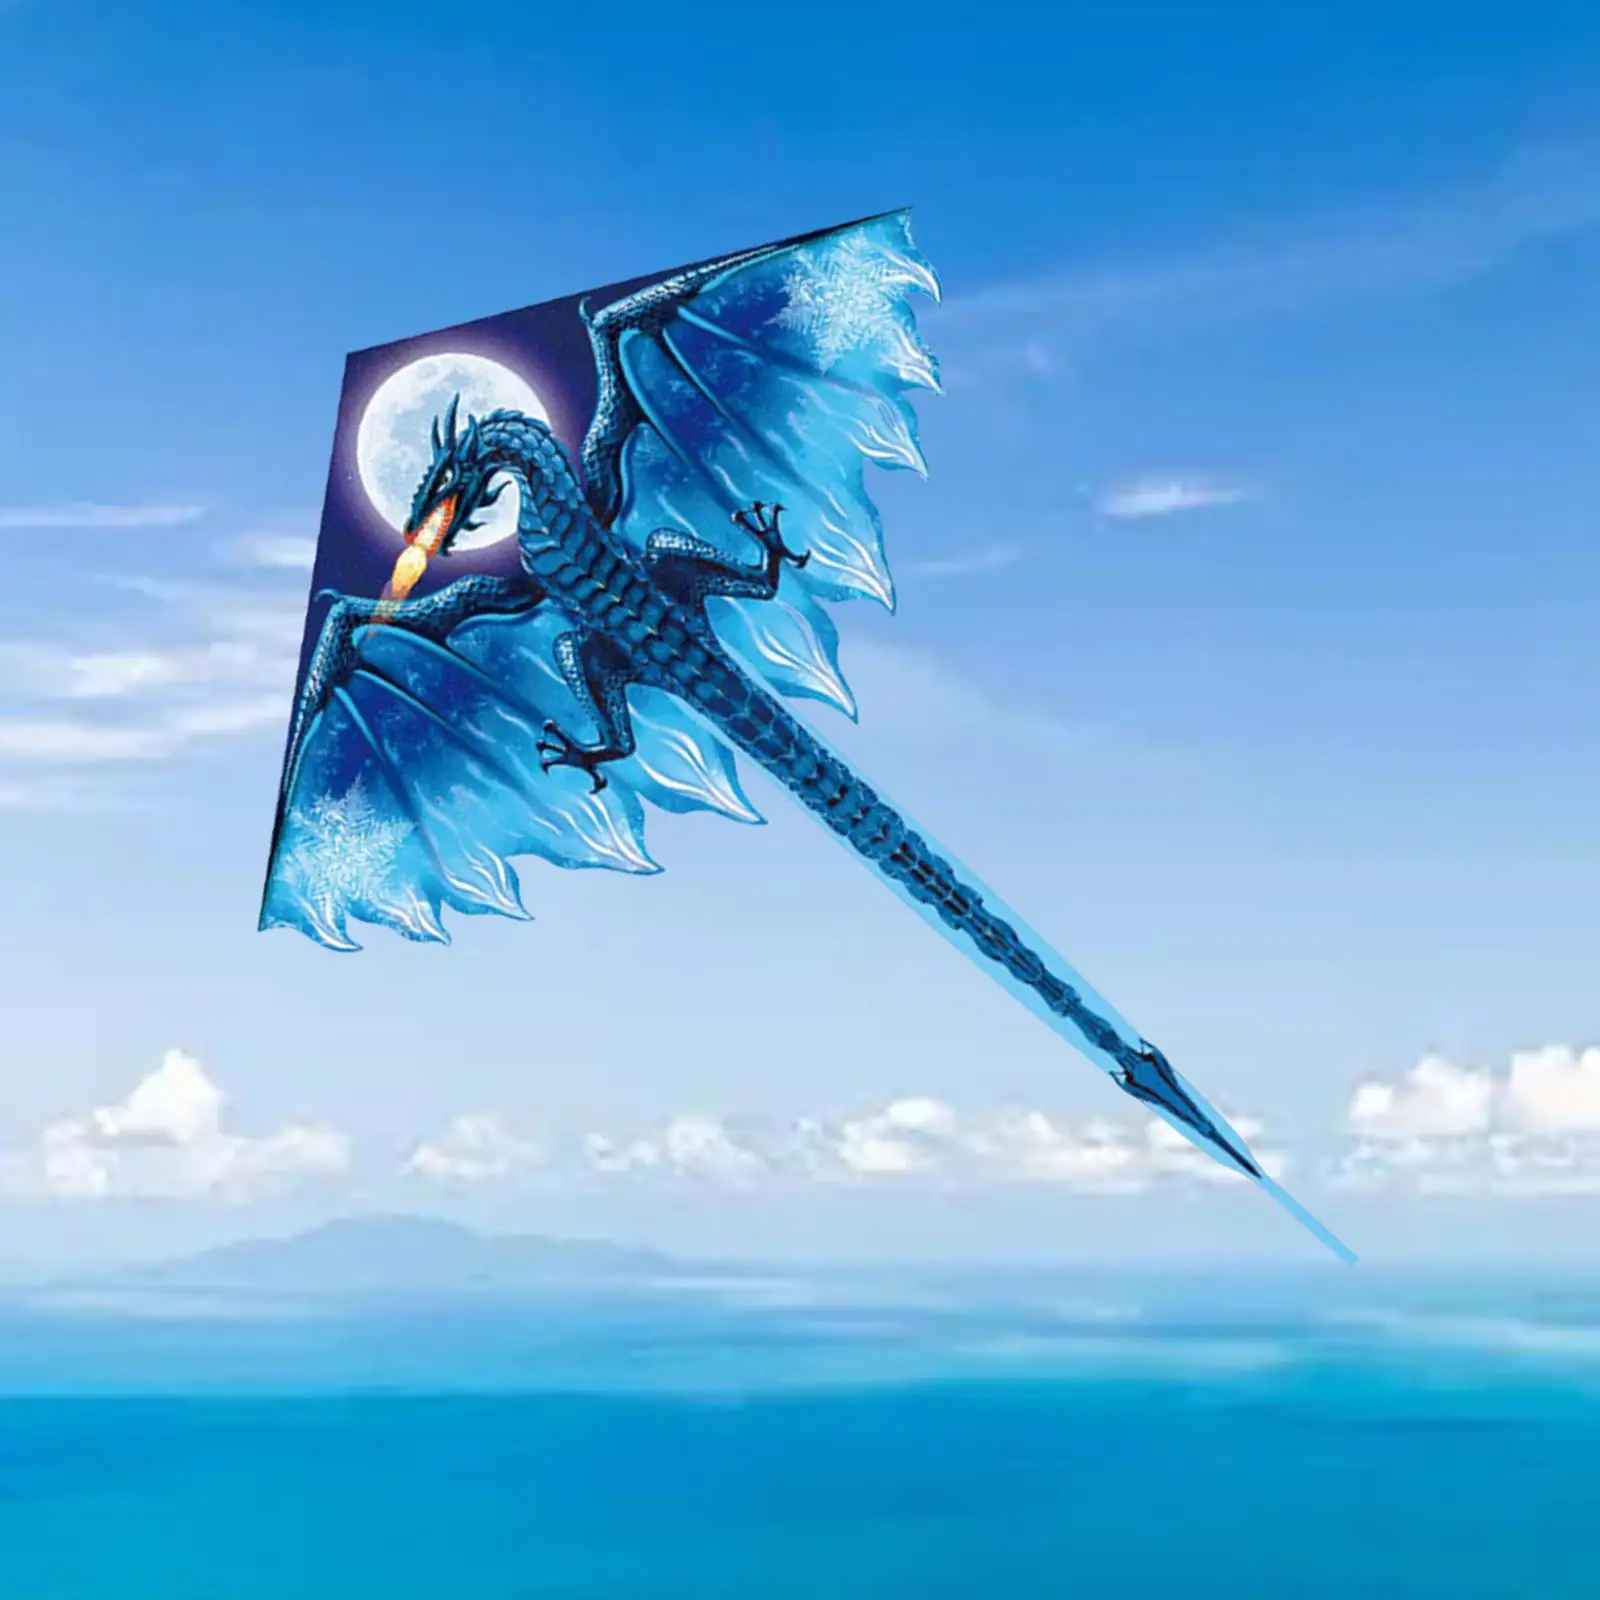 Large Spring Kite ice to Fly Colorful 3D dragon Animal for Park Beach Windy Day family